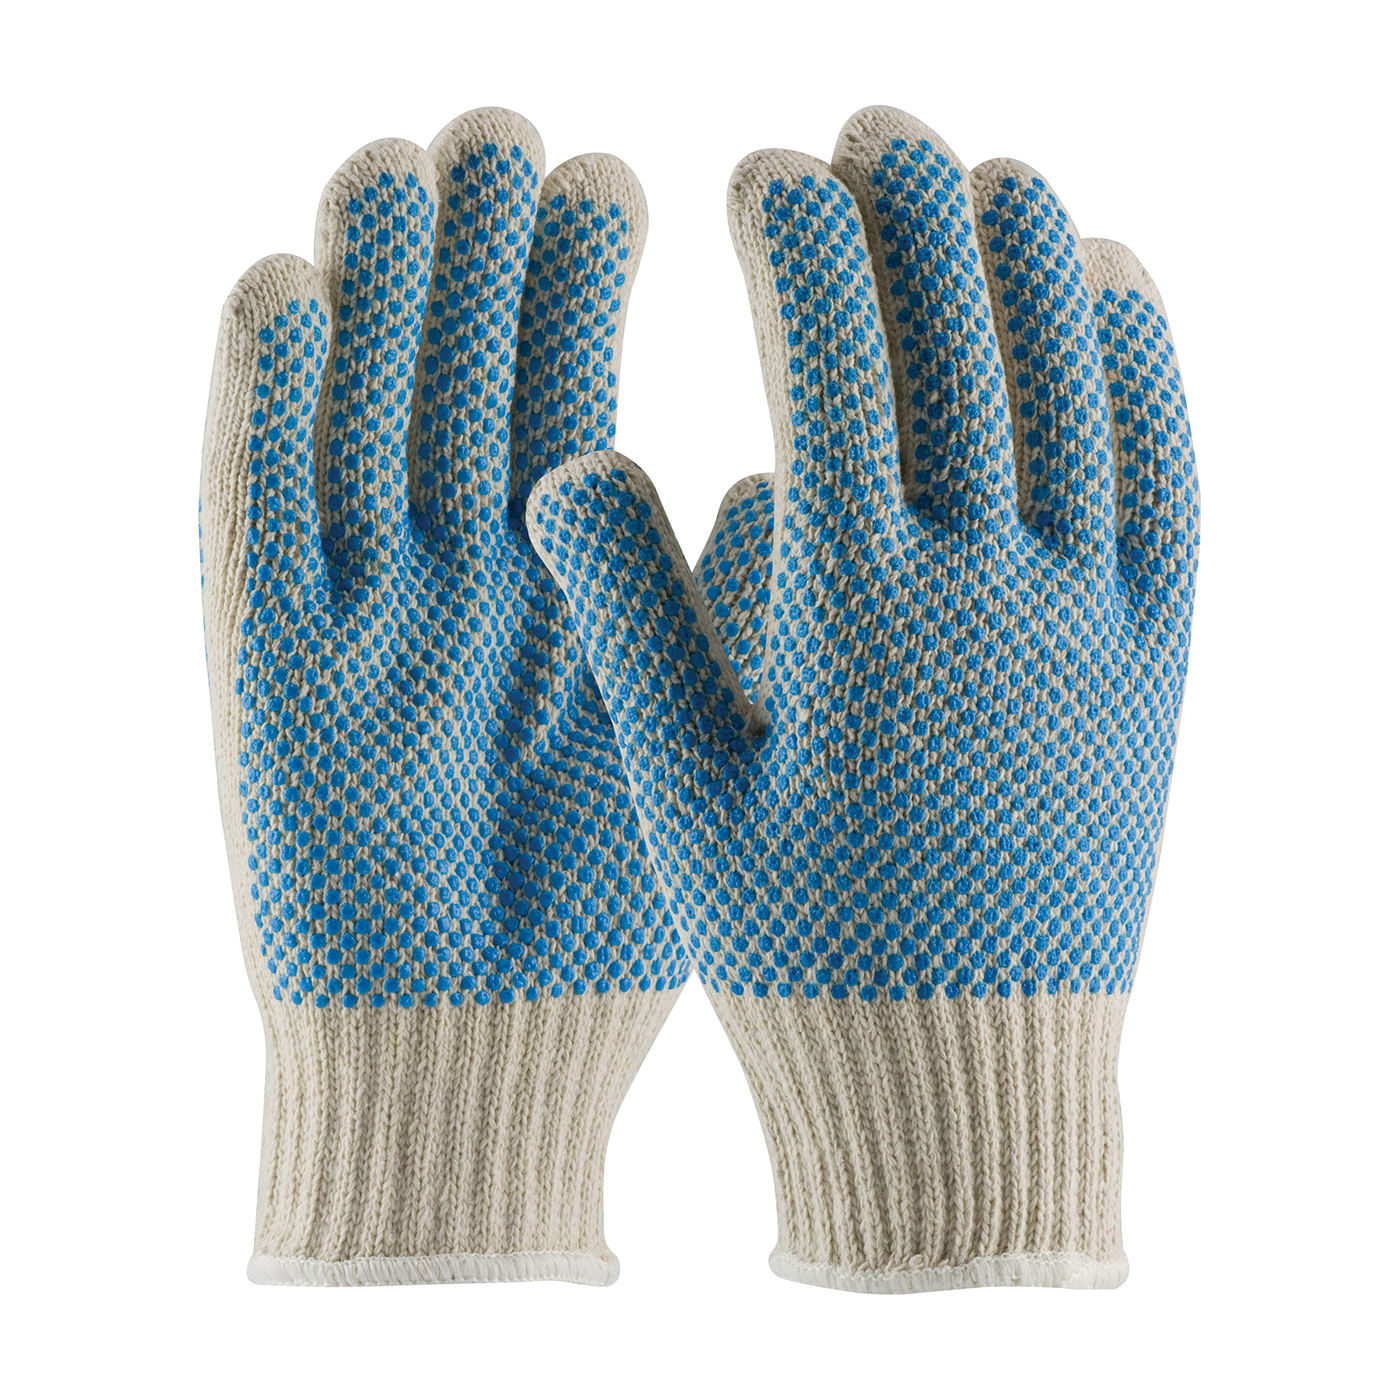 PIP® 37-C512PDD-BL/L Heavyweight Gloves, Coated, Full Finger/Seamless Knit Style, L, PVC Palm, 7 ga Cotton/Polyester, Blue/Natural, Knit Wrist Cuff, PVC Coating, Resists: Abrasion and Cut, Cotton/Polyester Lining